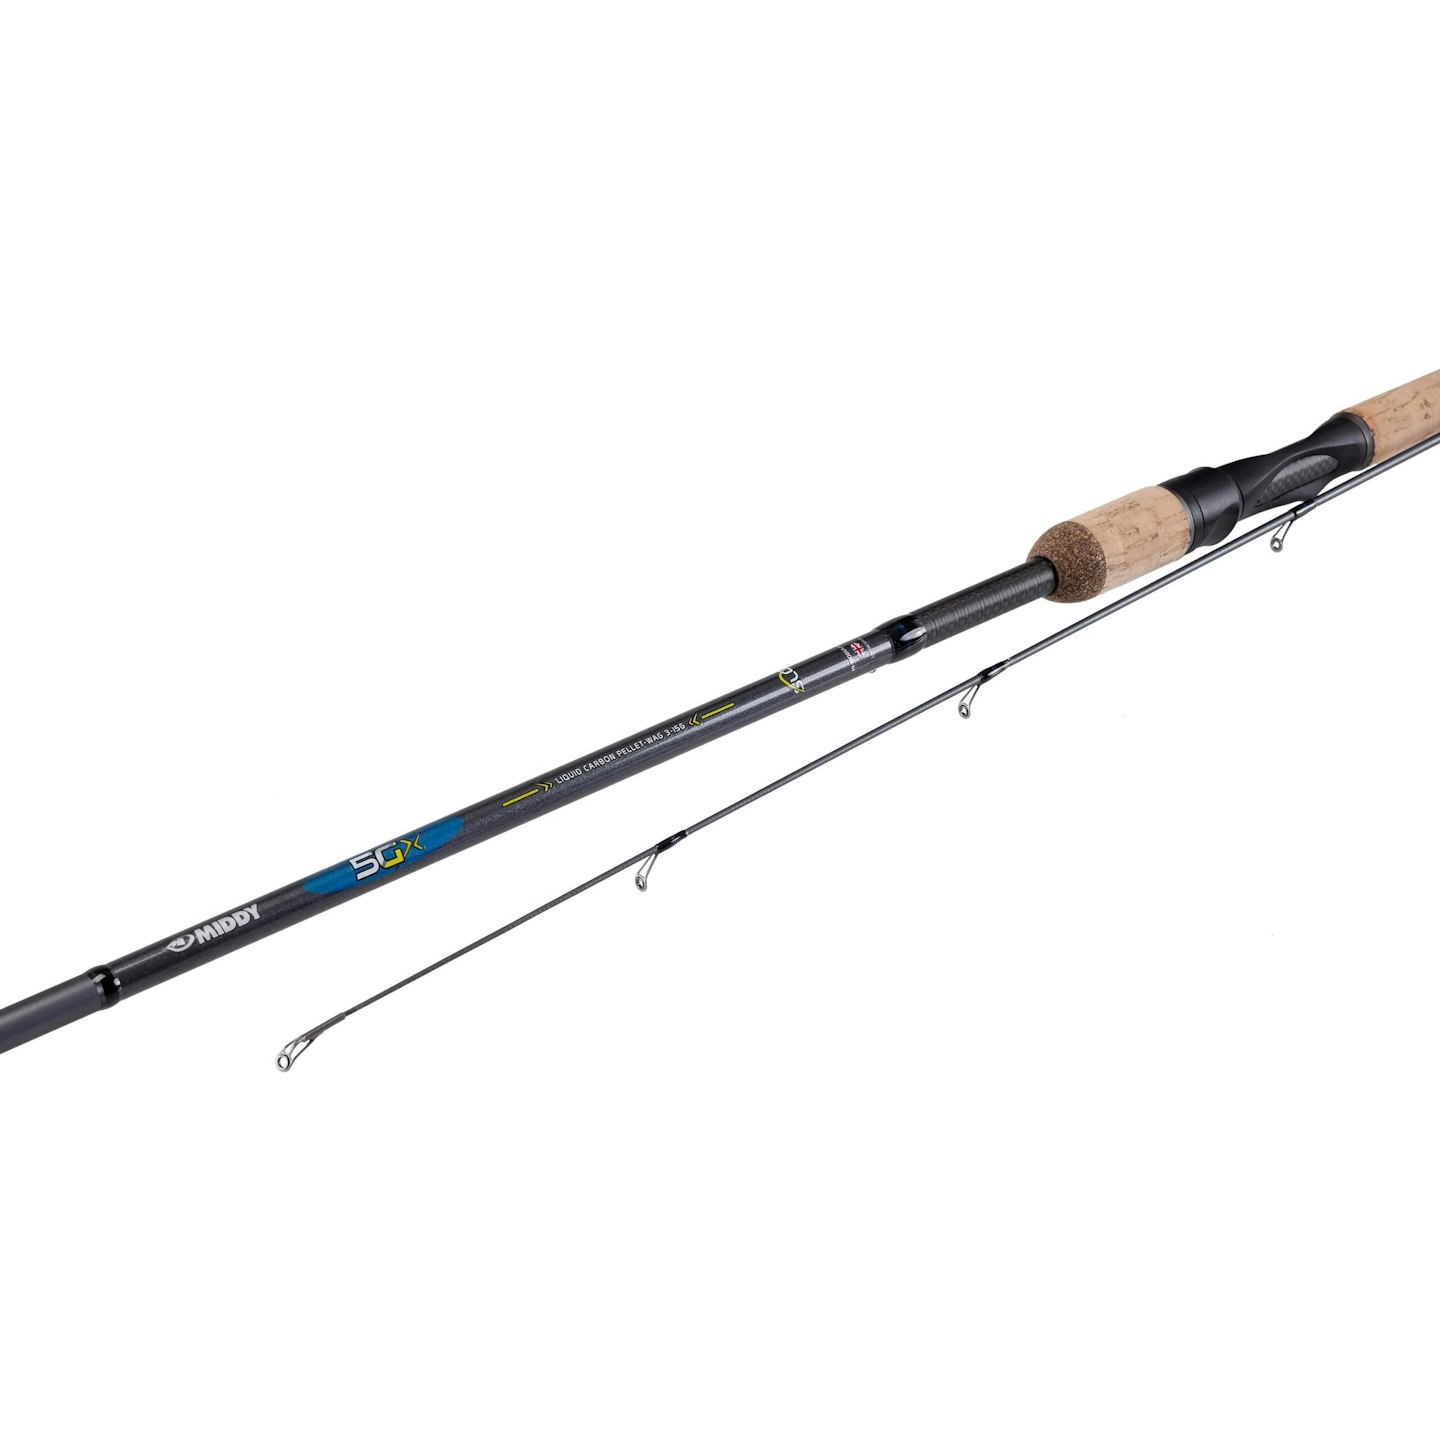 Middy 5G 11ft Pellet Waggler rod review